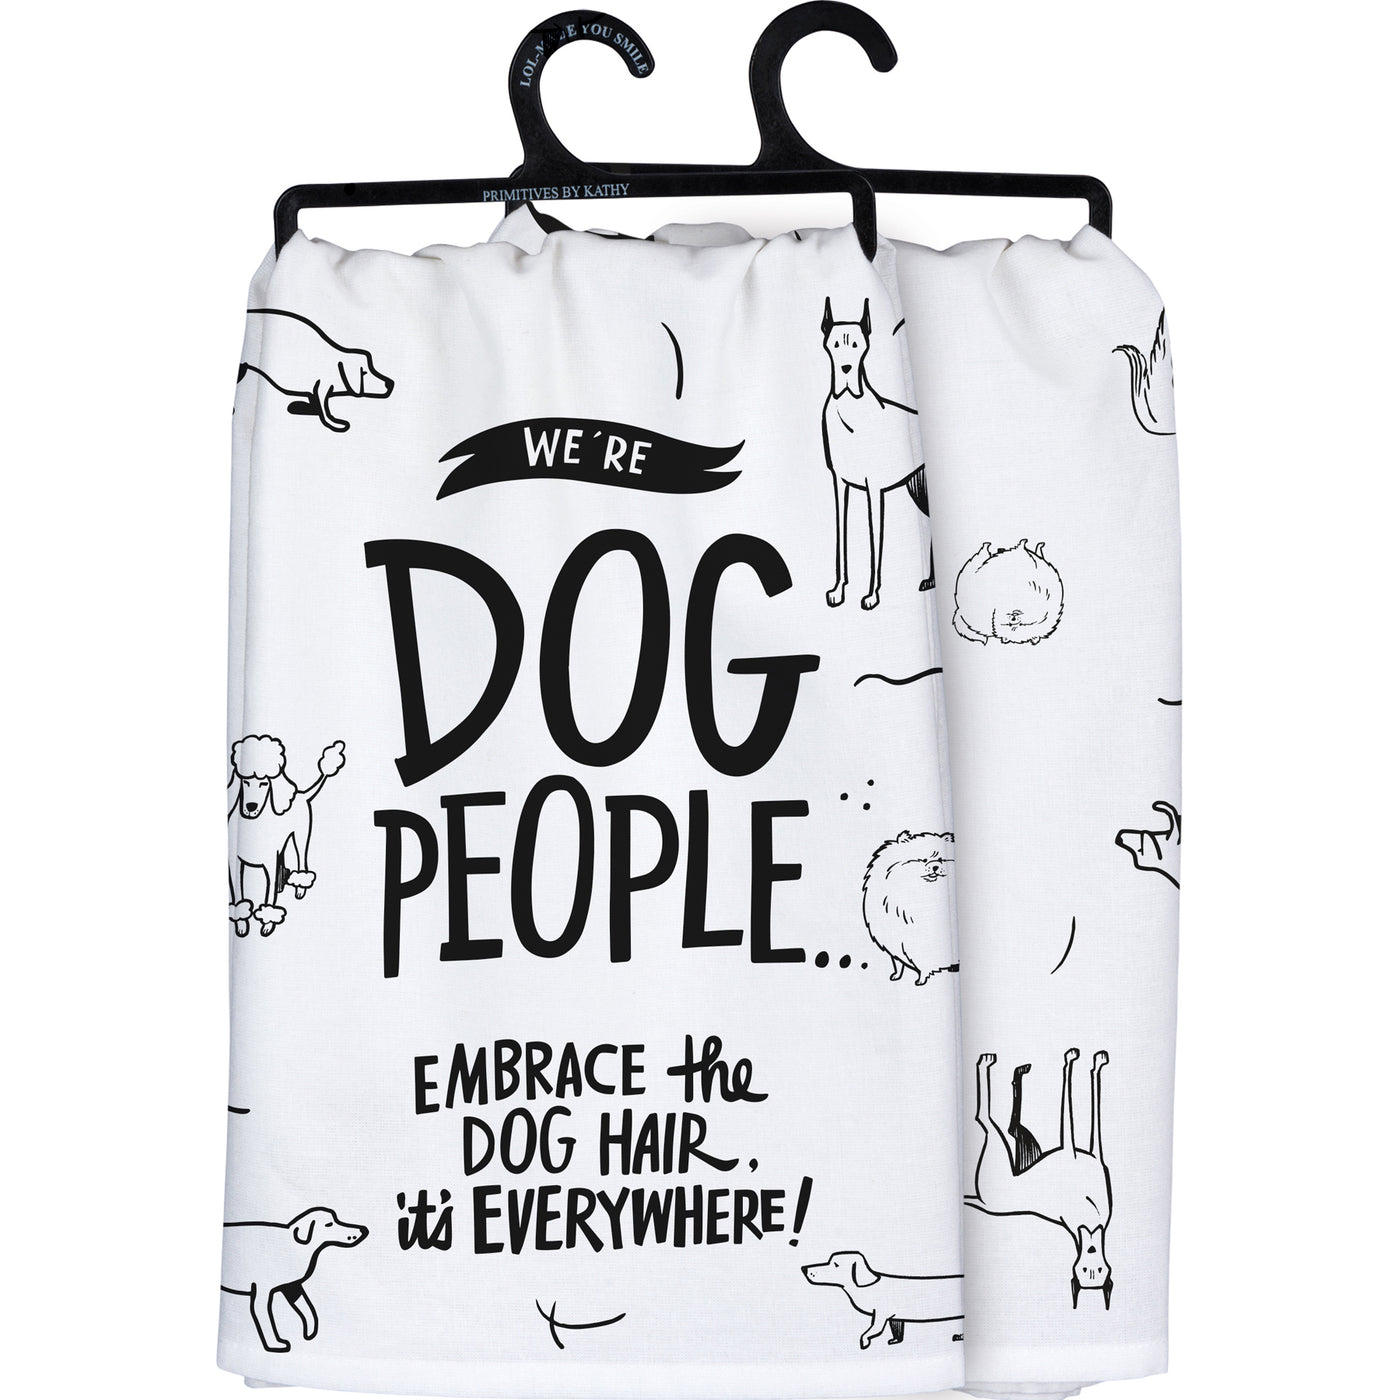 Surprise Me Sale 🤭 We Are Dog People Embrace The Dog Hair Kitchen Towel